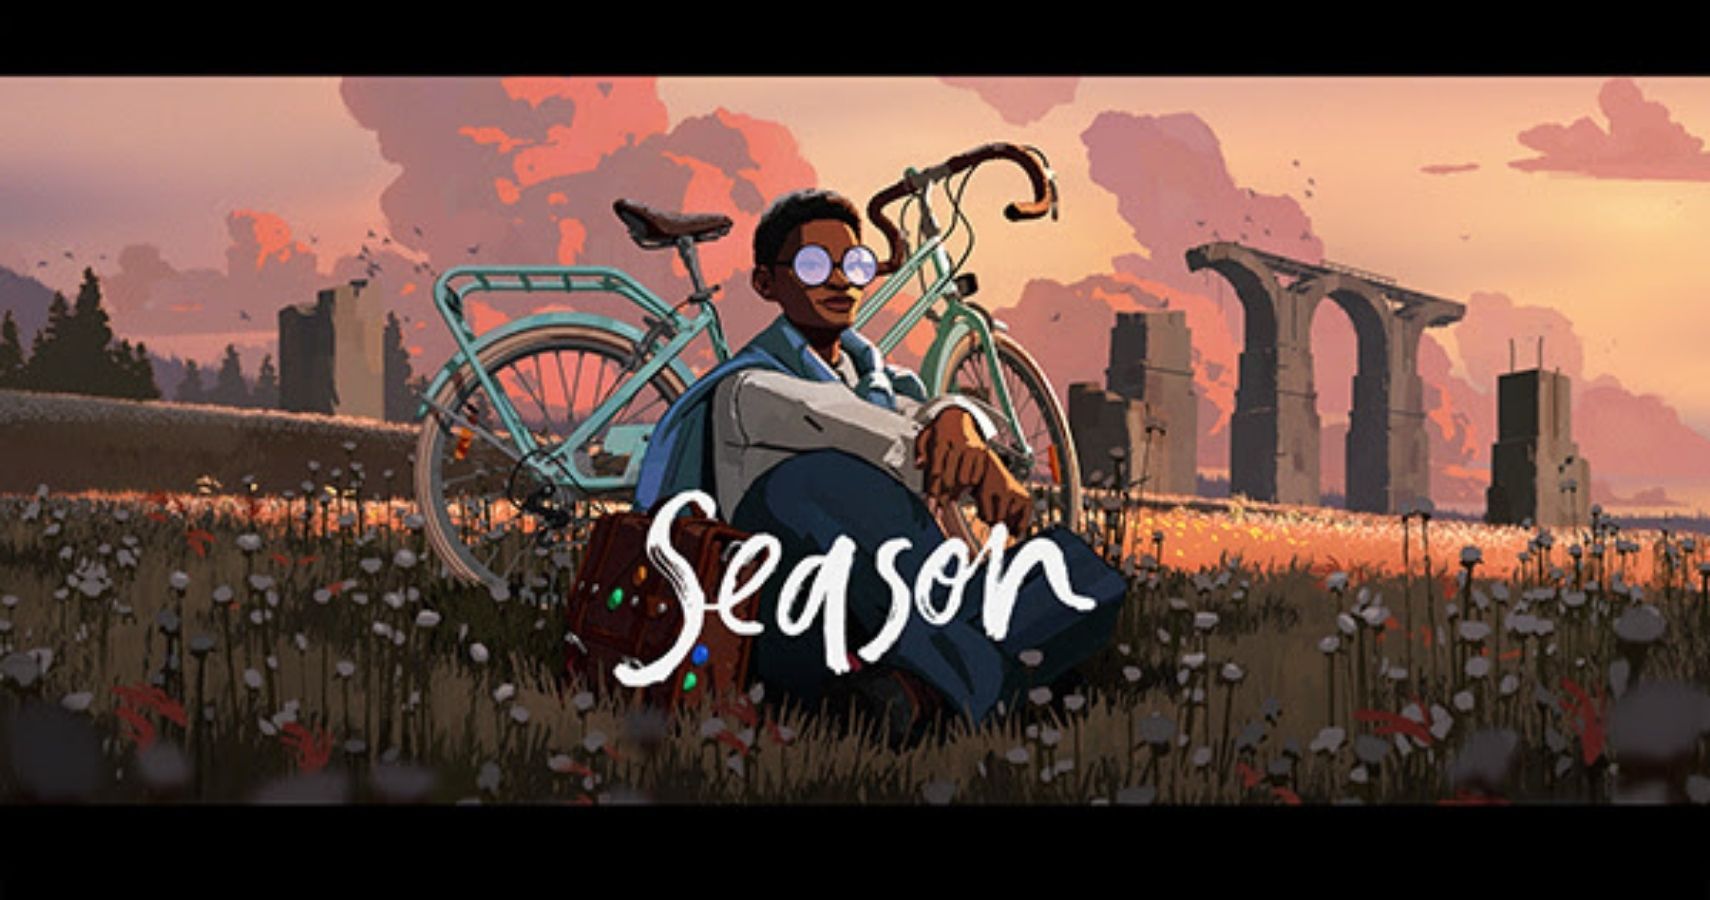 Explore The Last Moments Of Civilization By Bicycle In Season